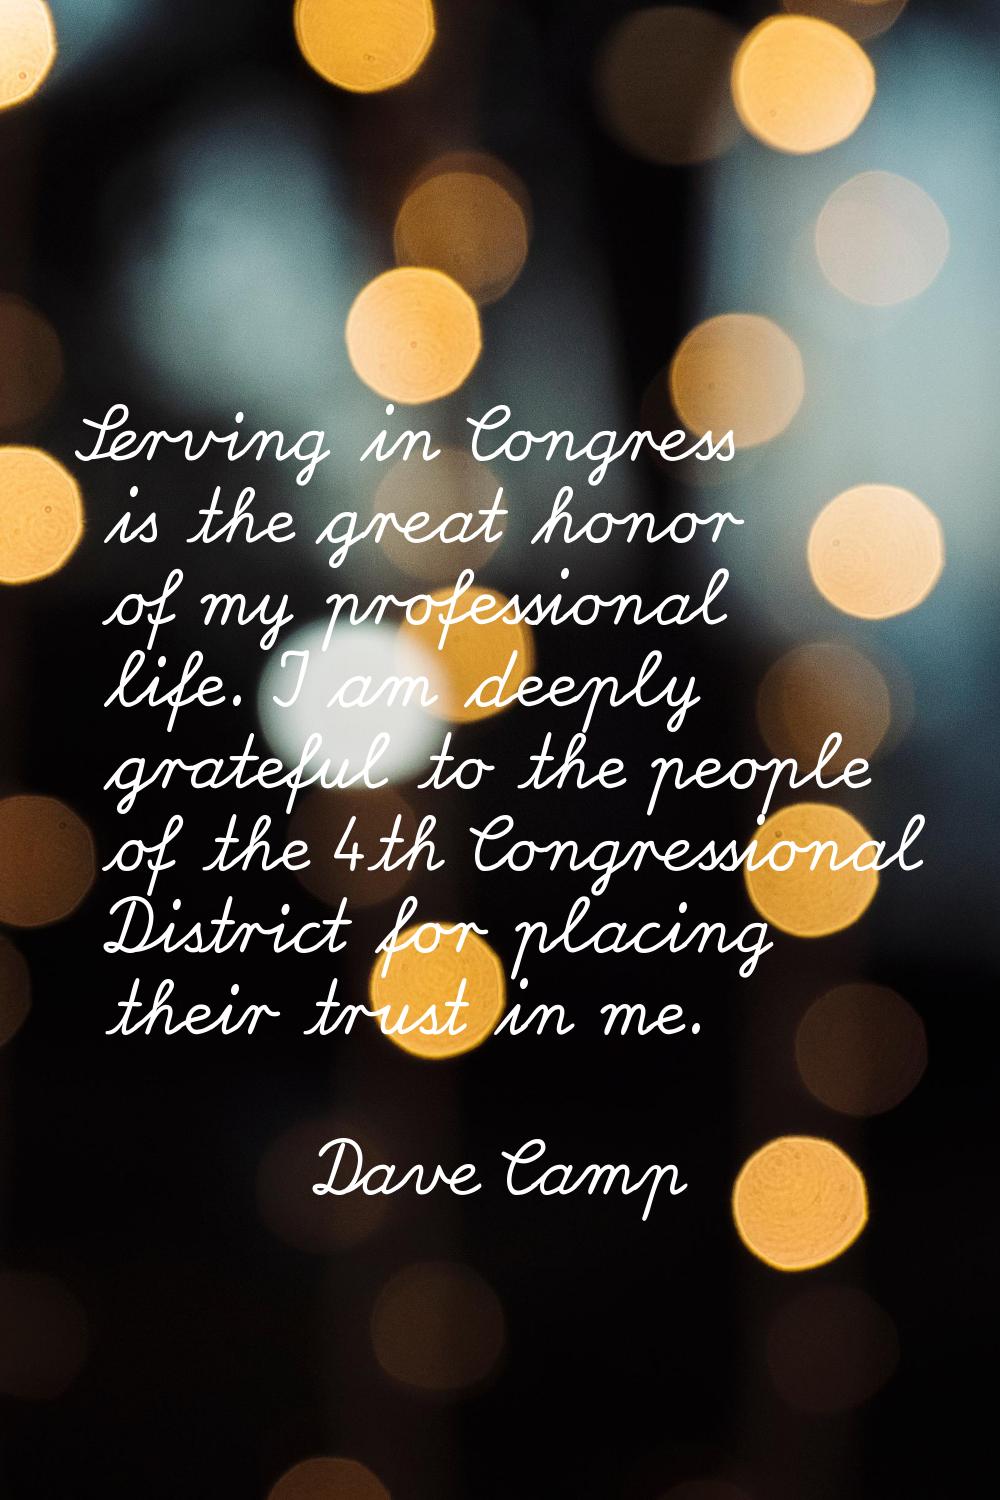 Serving in Congress is the great honor of my professional life. I am deeply grateful to the people 